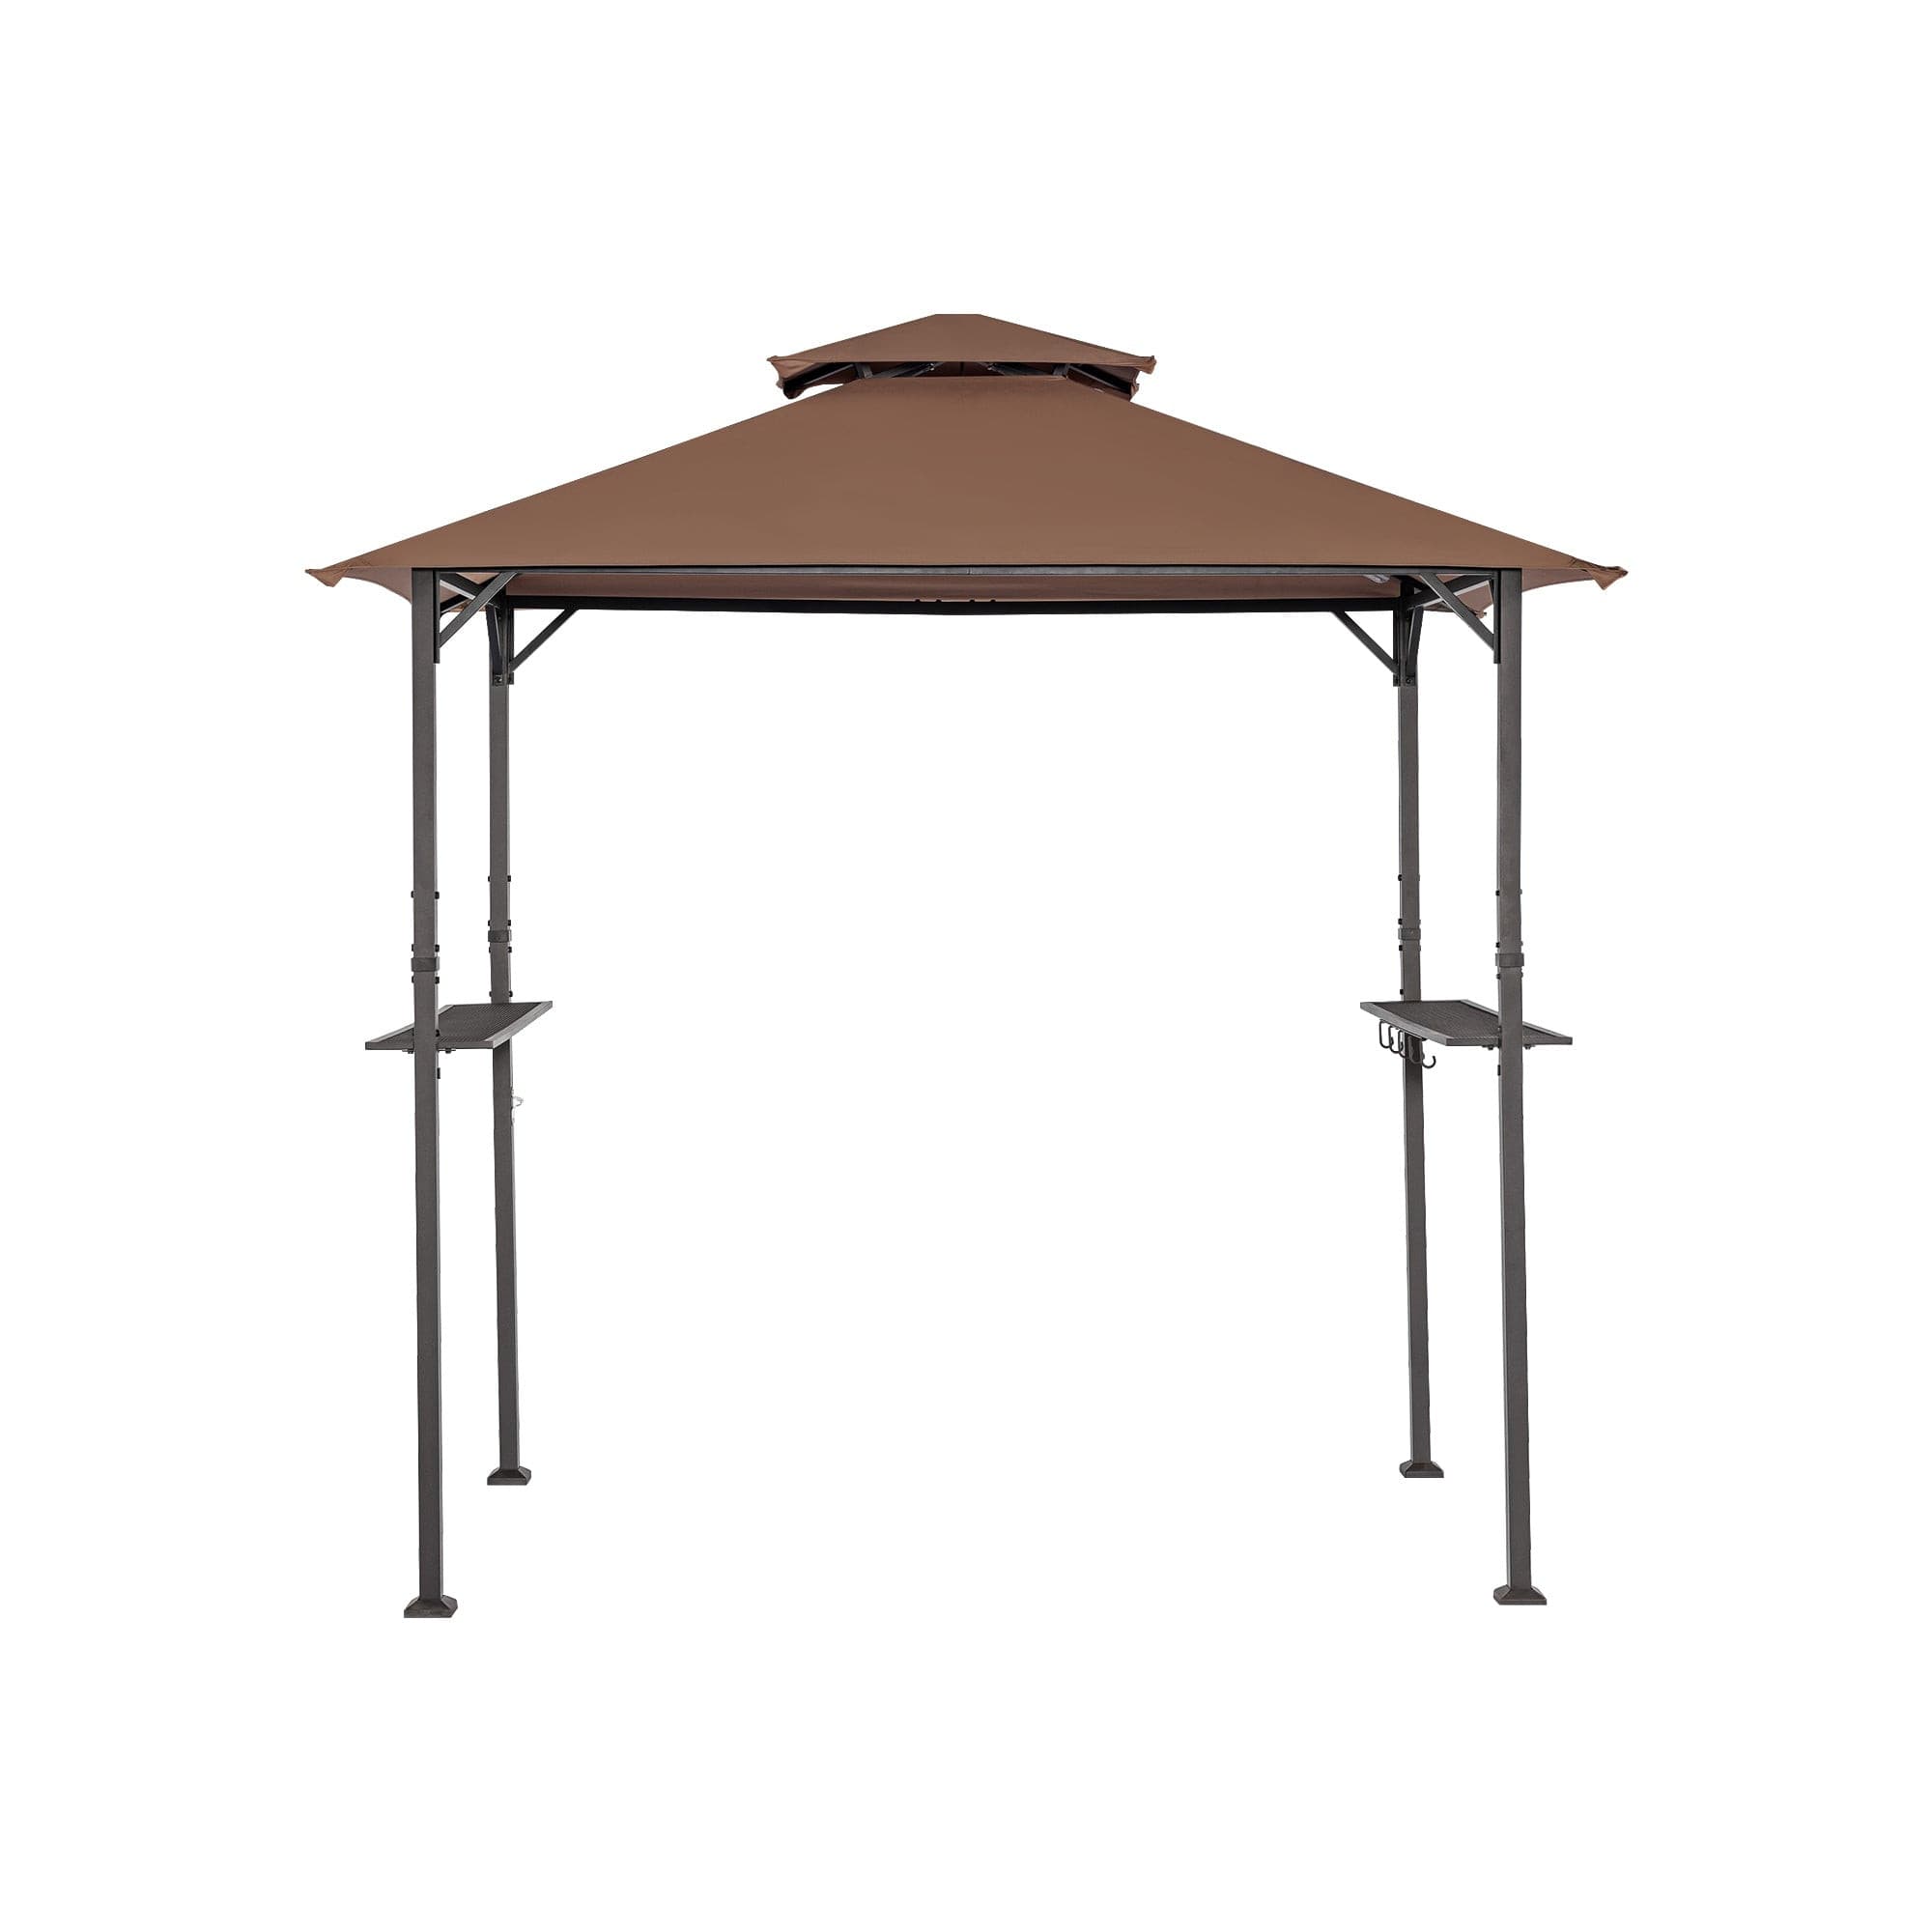 OLILAWN 8' x 5' Grill Gazebo, BBQ Gazebo Canopy for Outdoor Grill, Booarbecue Canopy